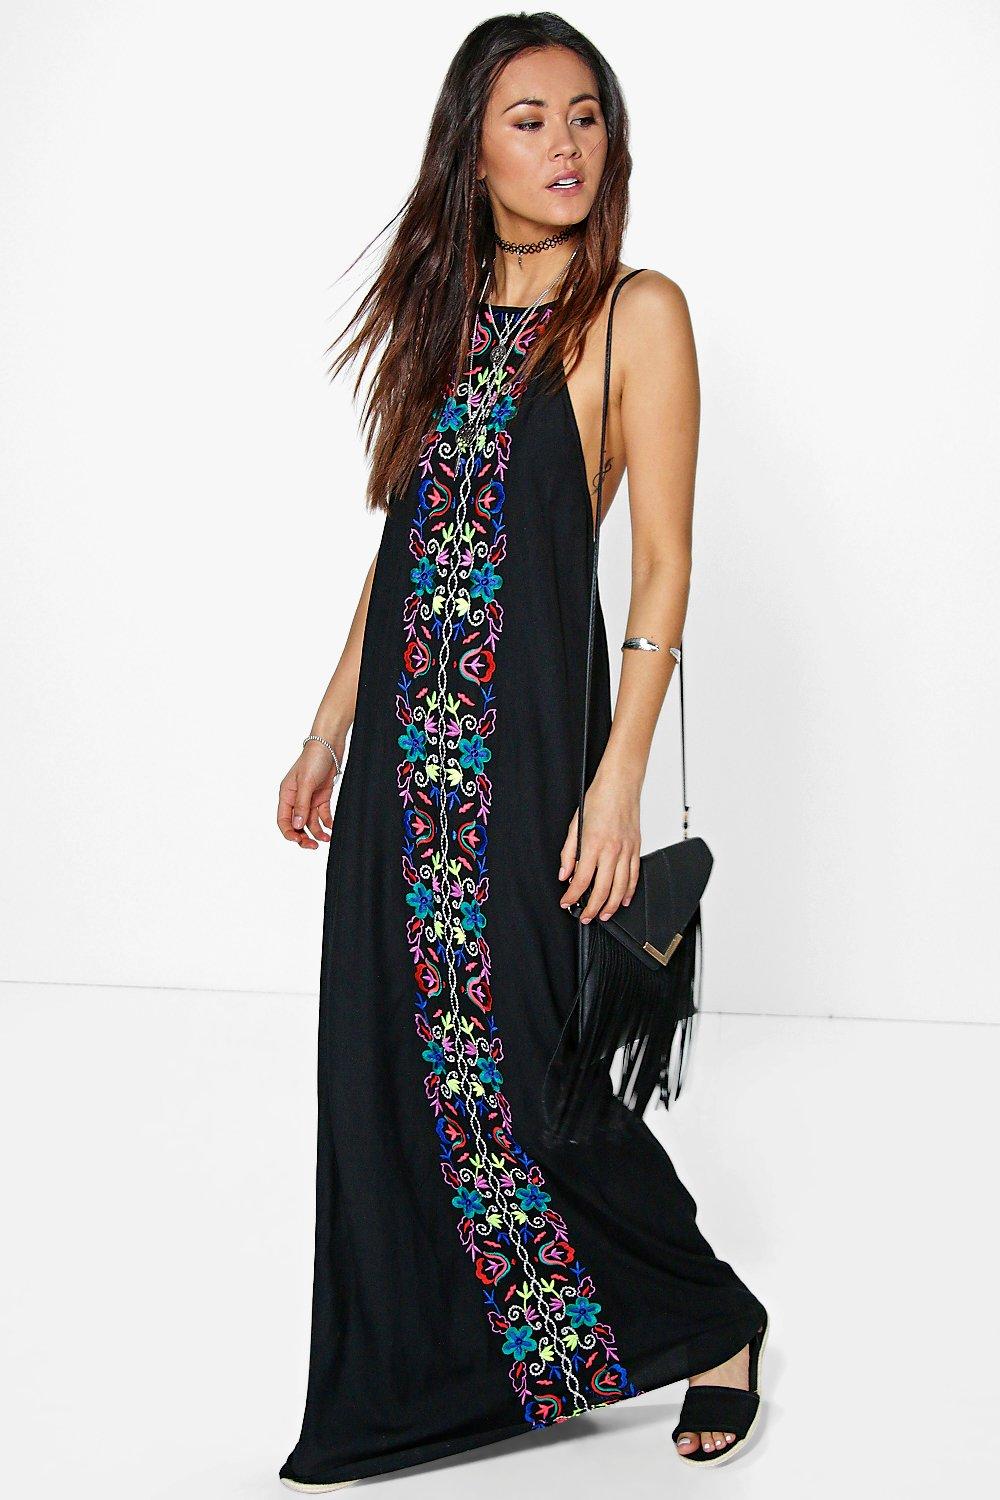 Boutique Amy Multi Embroidered Maxi Dress at boohoo.com